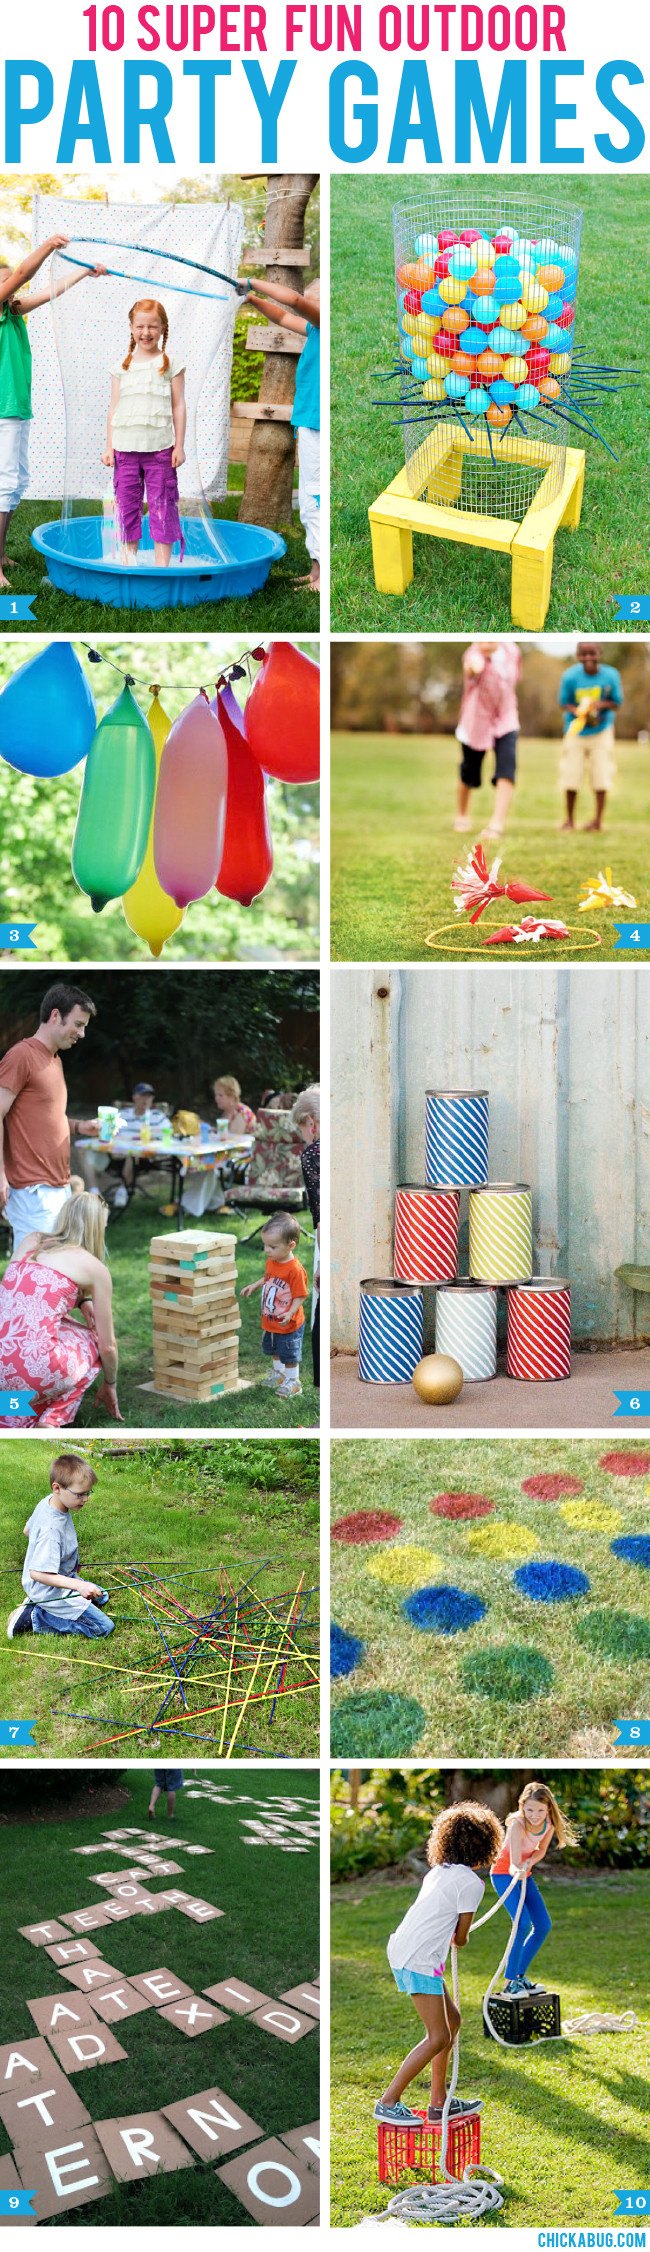 Adult Summer Party Ideas
 10 super fun outdoor party games